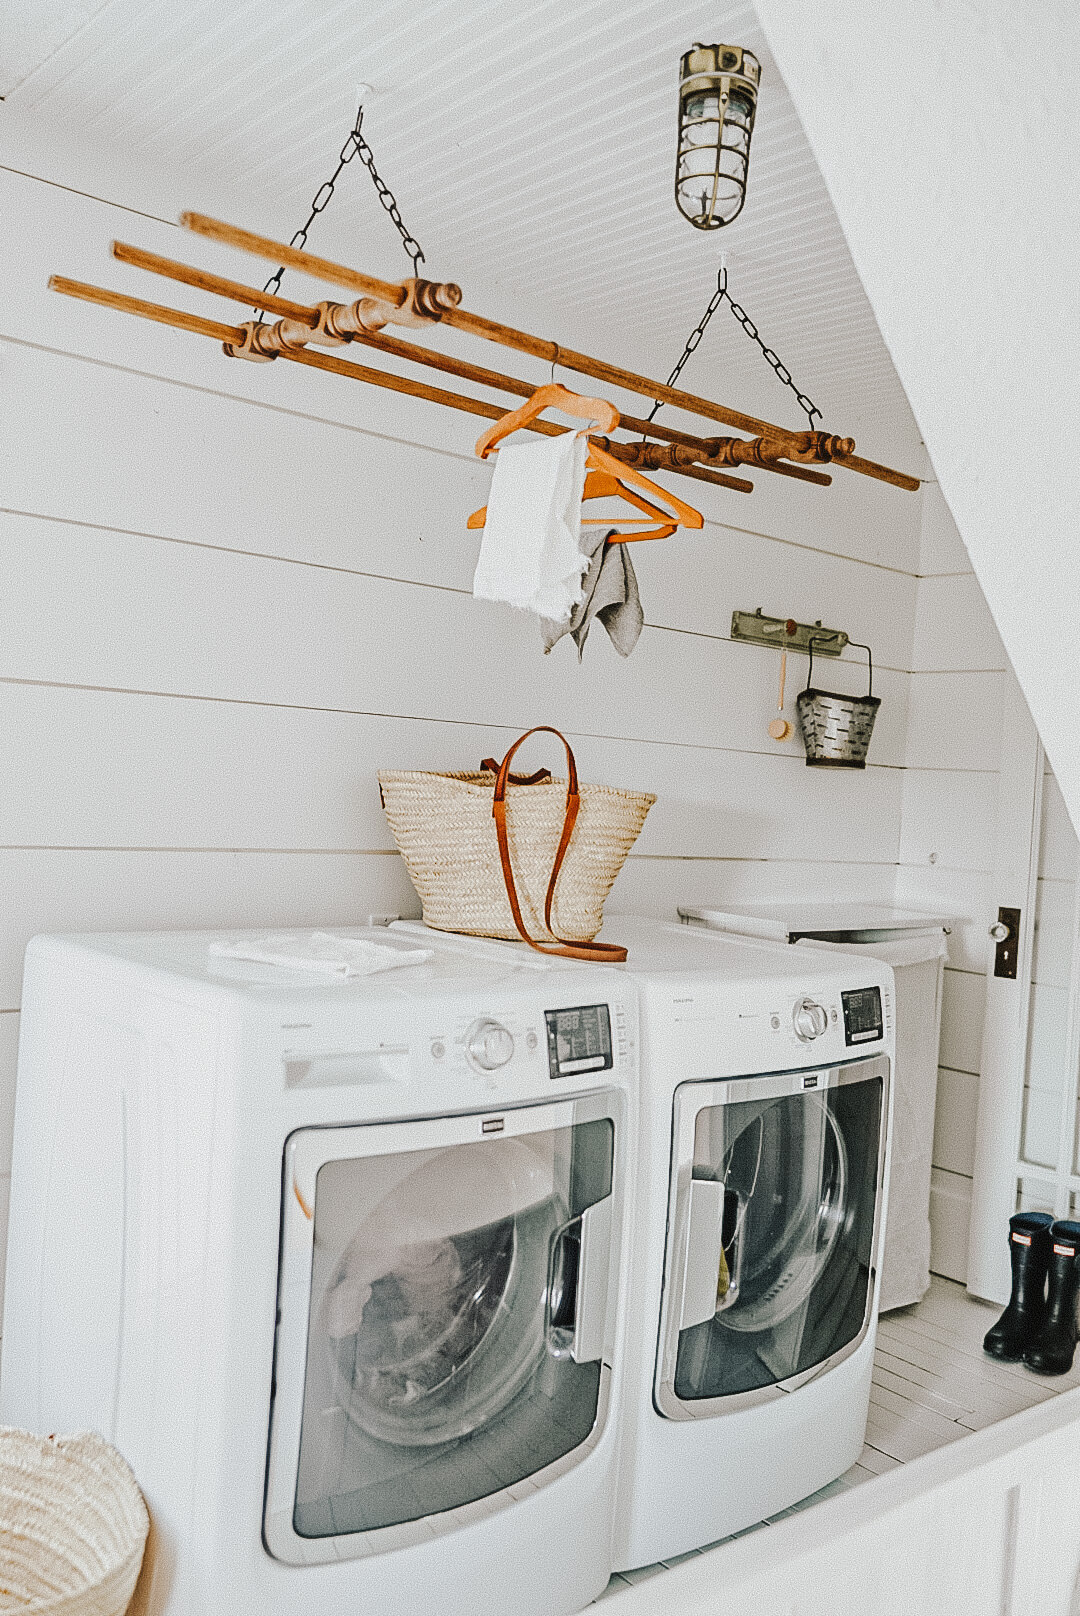 Ceiling mounted clothes drying rack